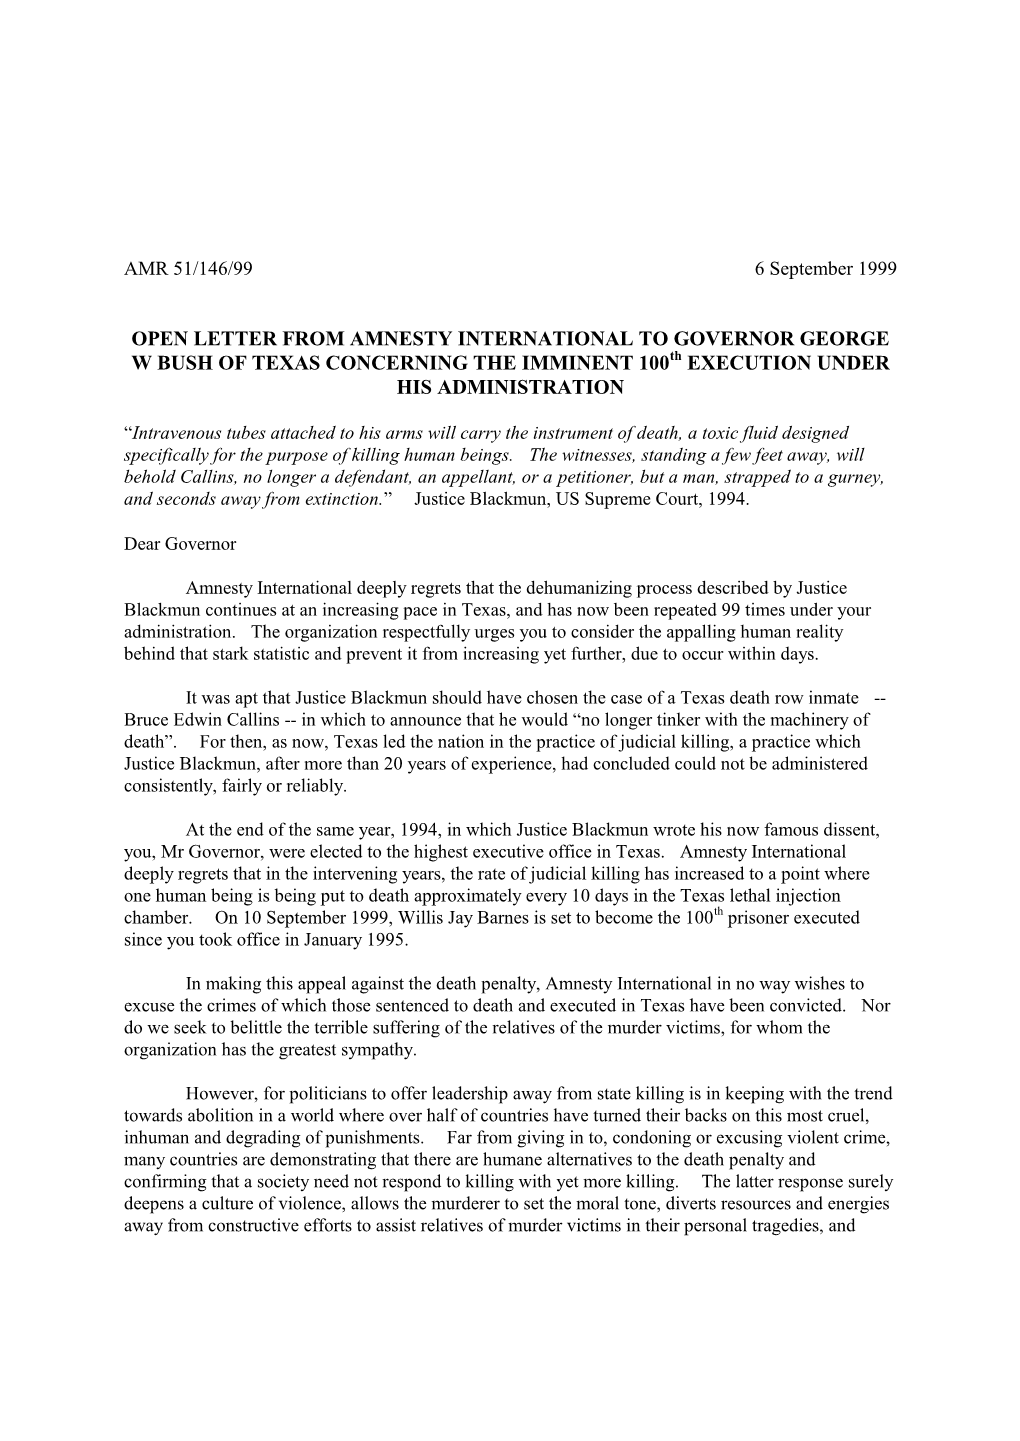 OPEN LETTER from AMNESTY INTERNATIONAL to GOVERNOR GEORGE W BUSH of TEXAS CONCERNING the IMMINENT 100Th EXECUTION UNDER HIS ADMINISTRATION